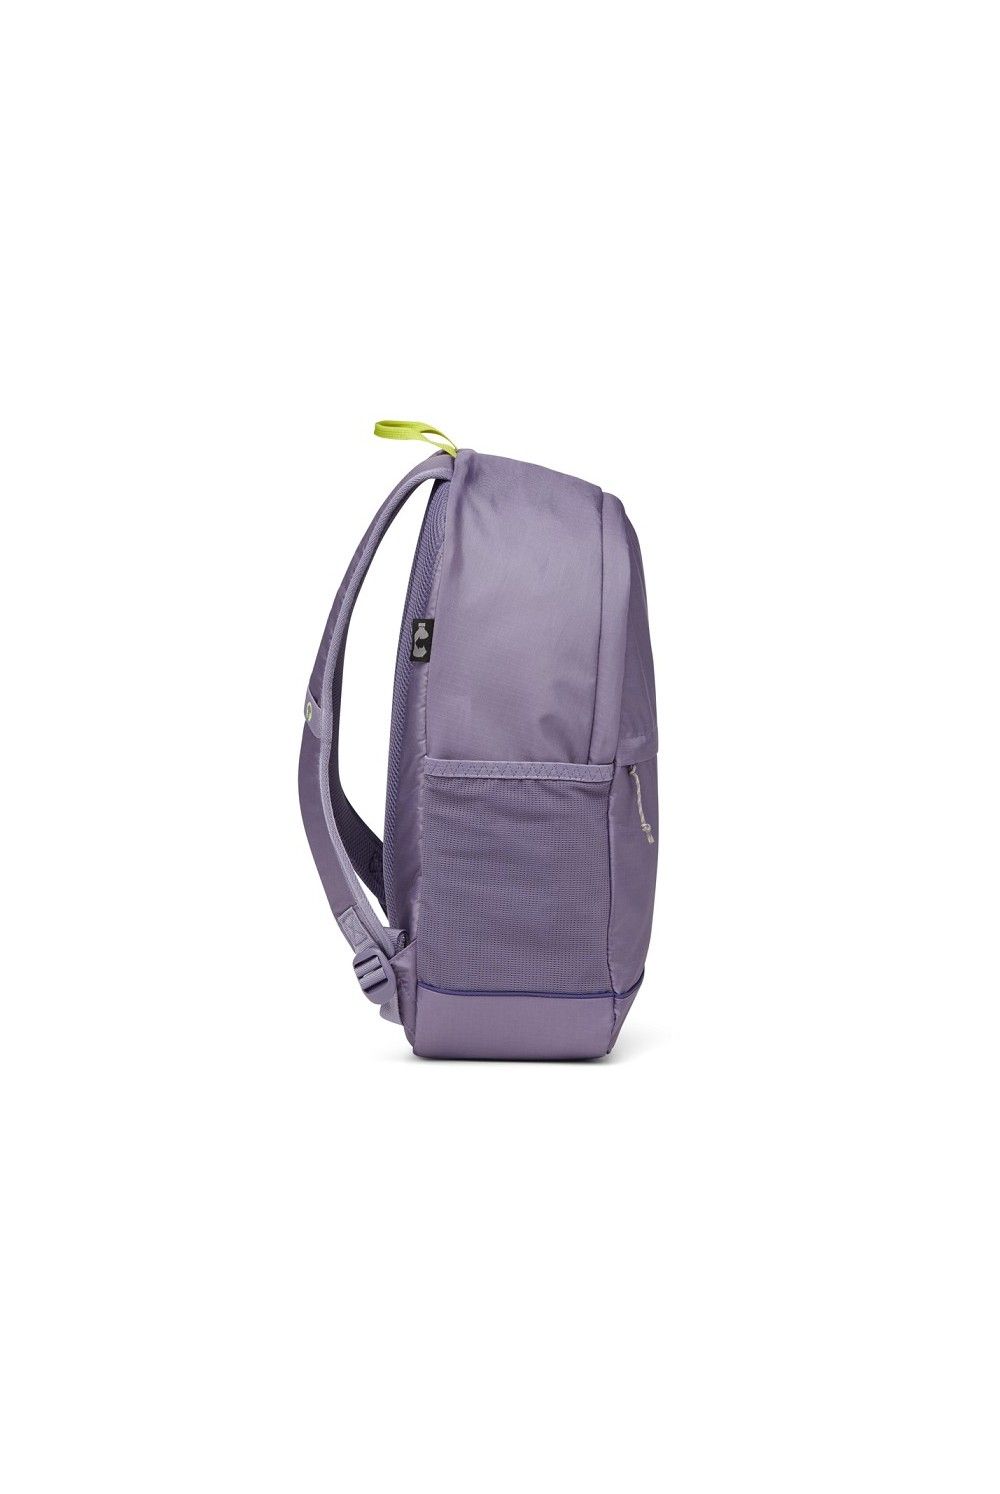 Sac à dos scolaire Satch Fly Ripstop Lilac